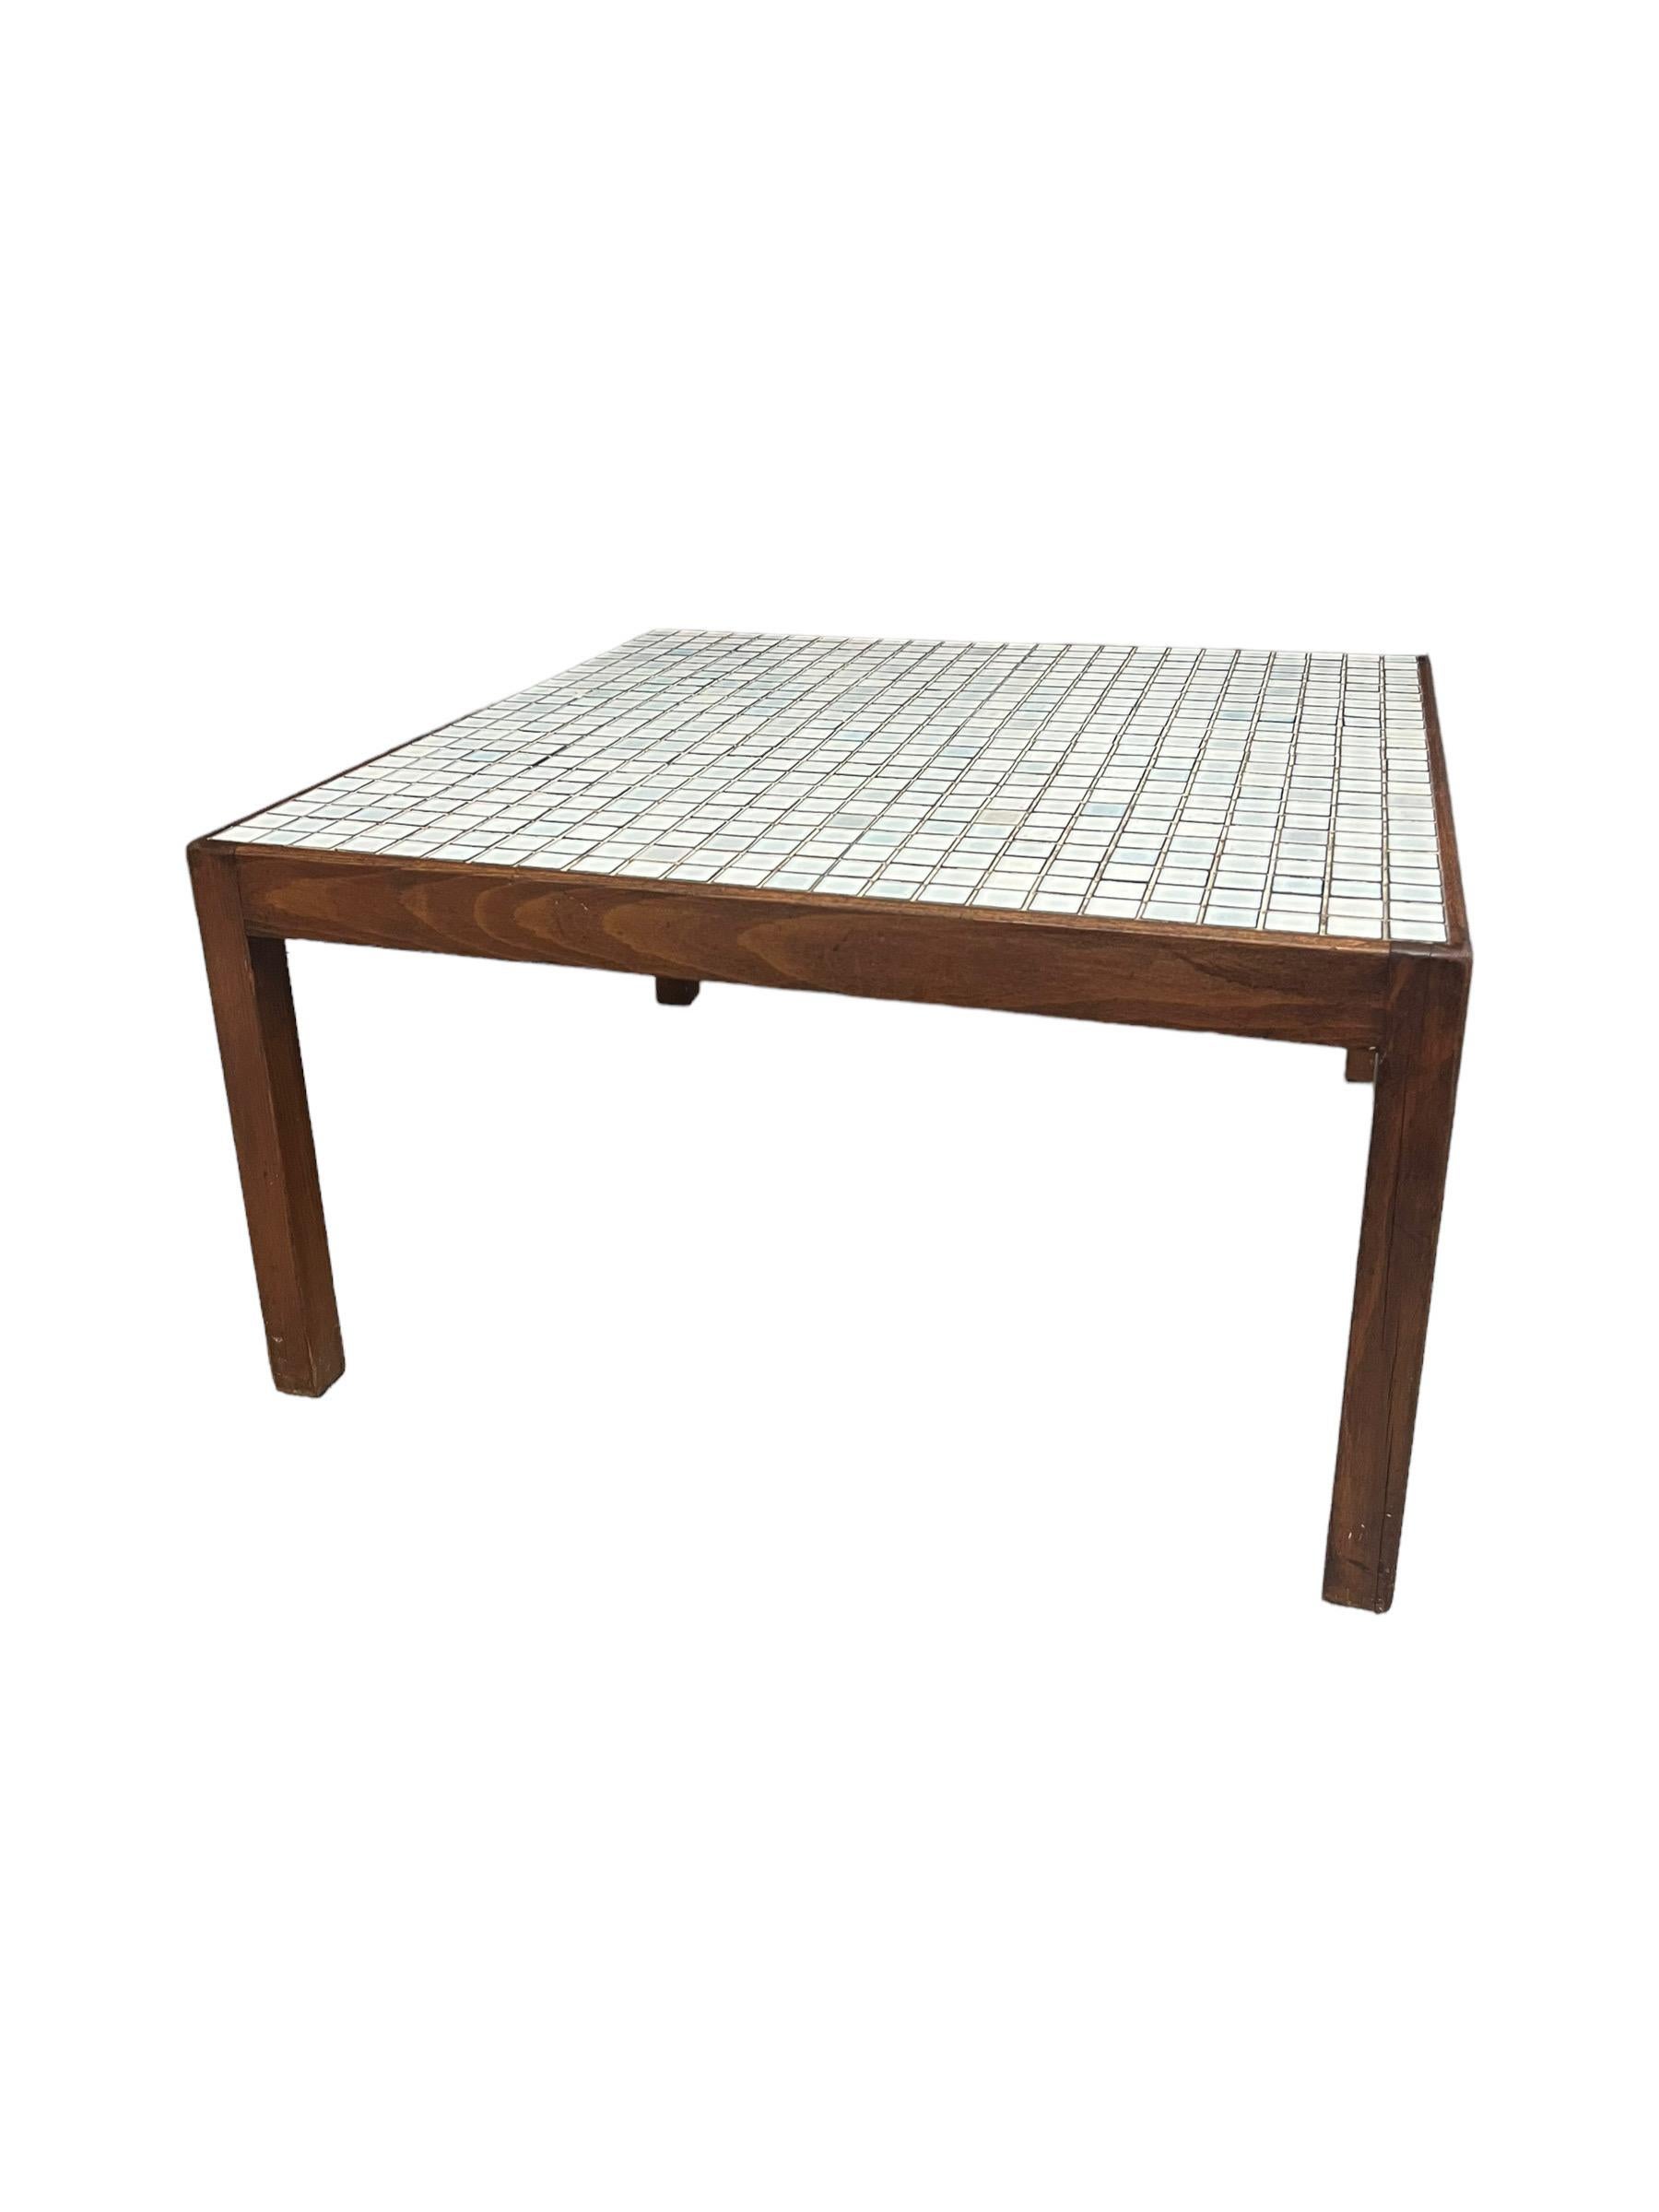 Mid-Century Modern Vintage Mid Century Modern Walnut Table With Tile Top For Sale